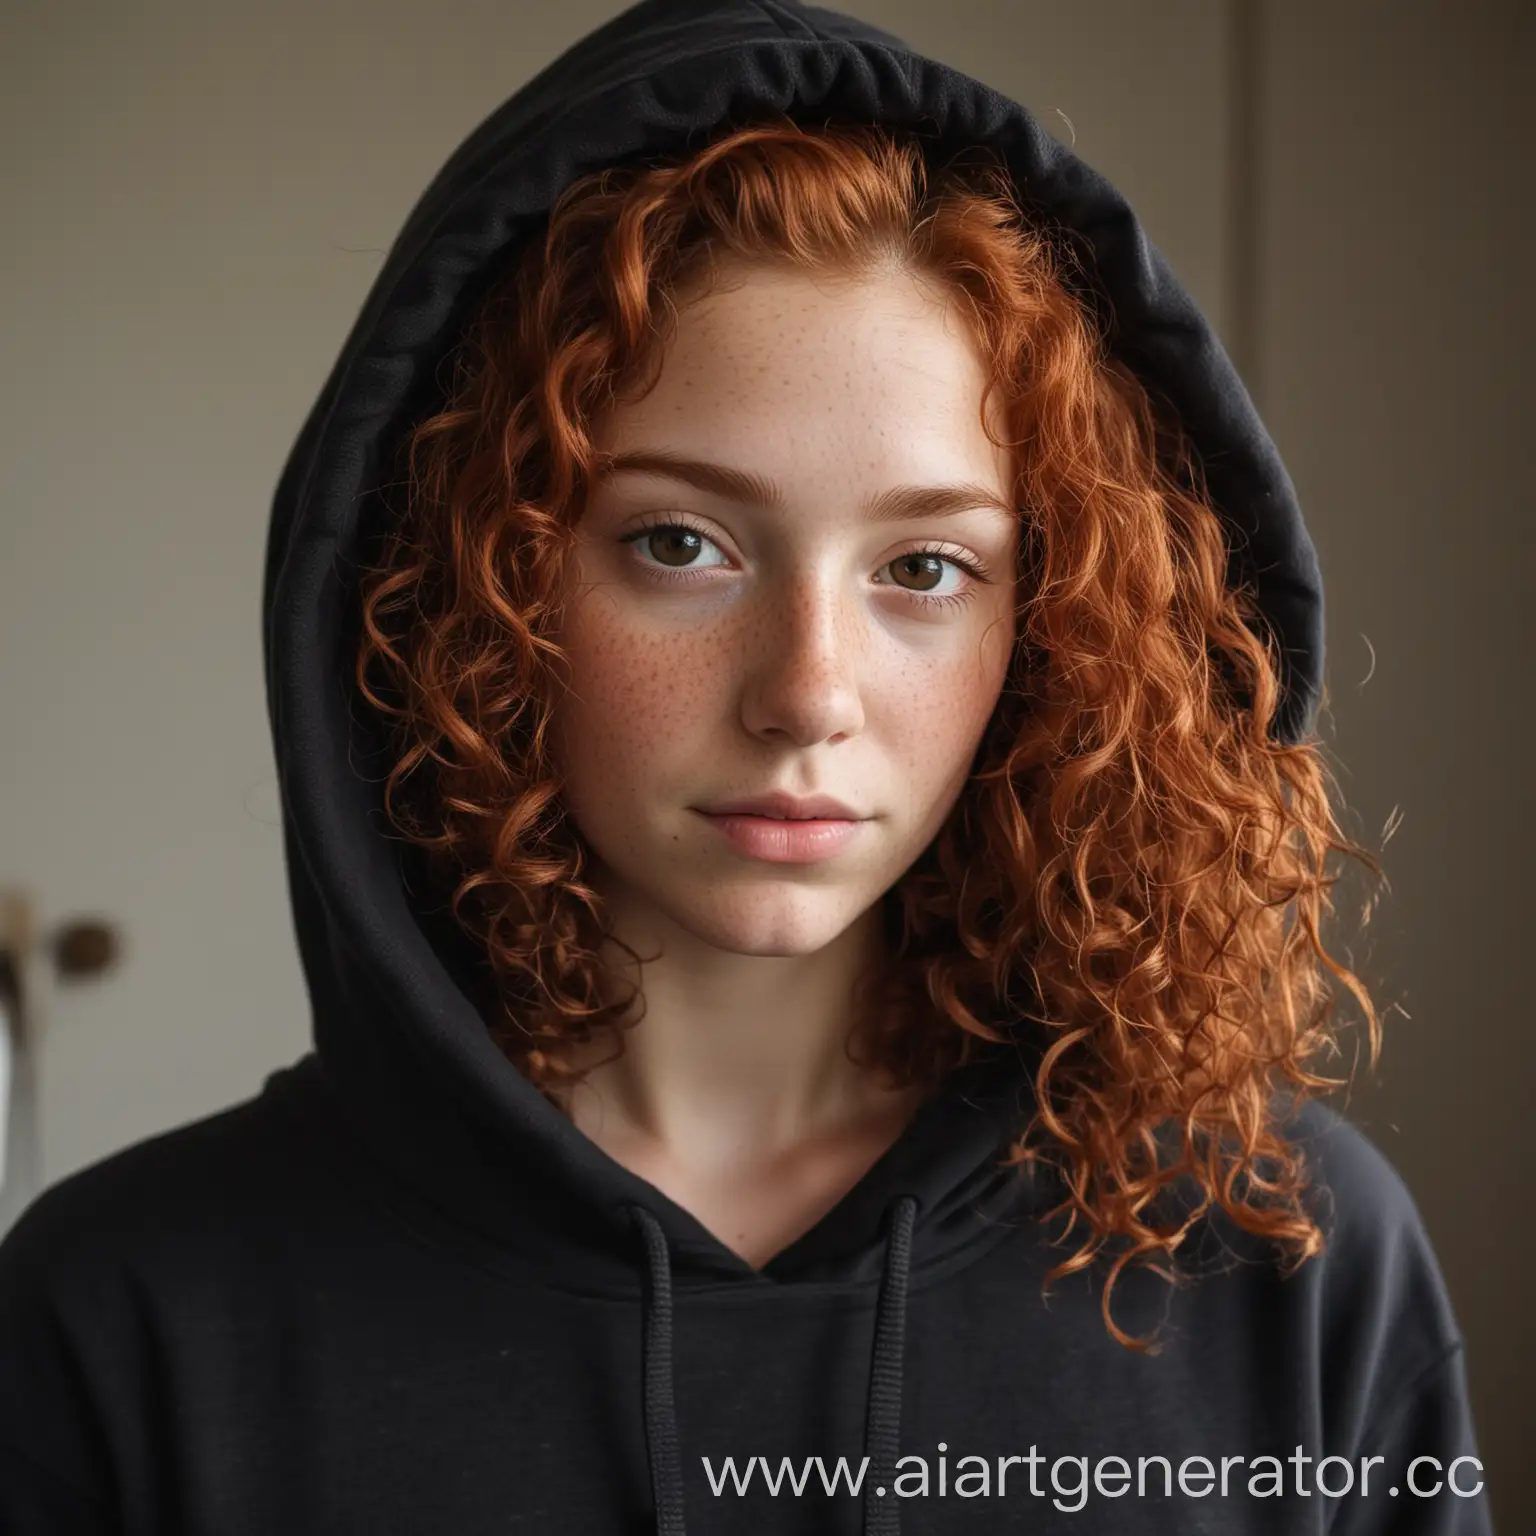 Home-Portrait-Curly-RedHaired-Girl-in-Black-Hoodie